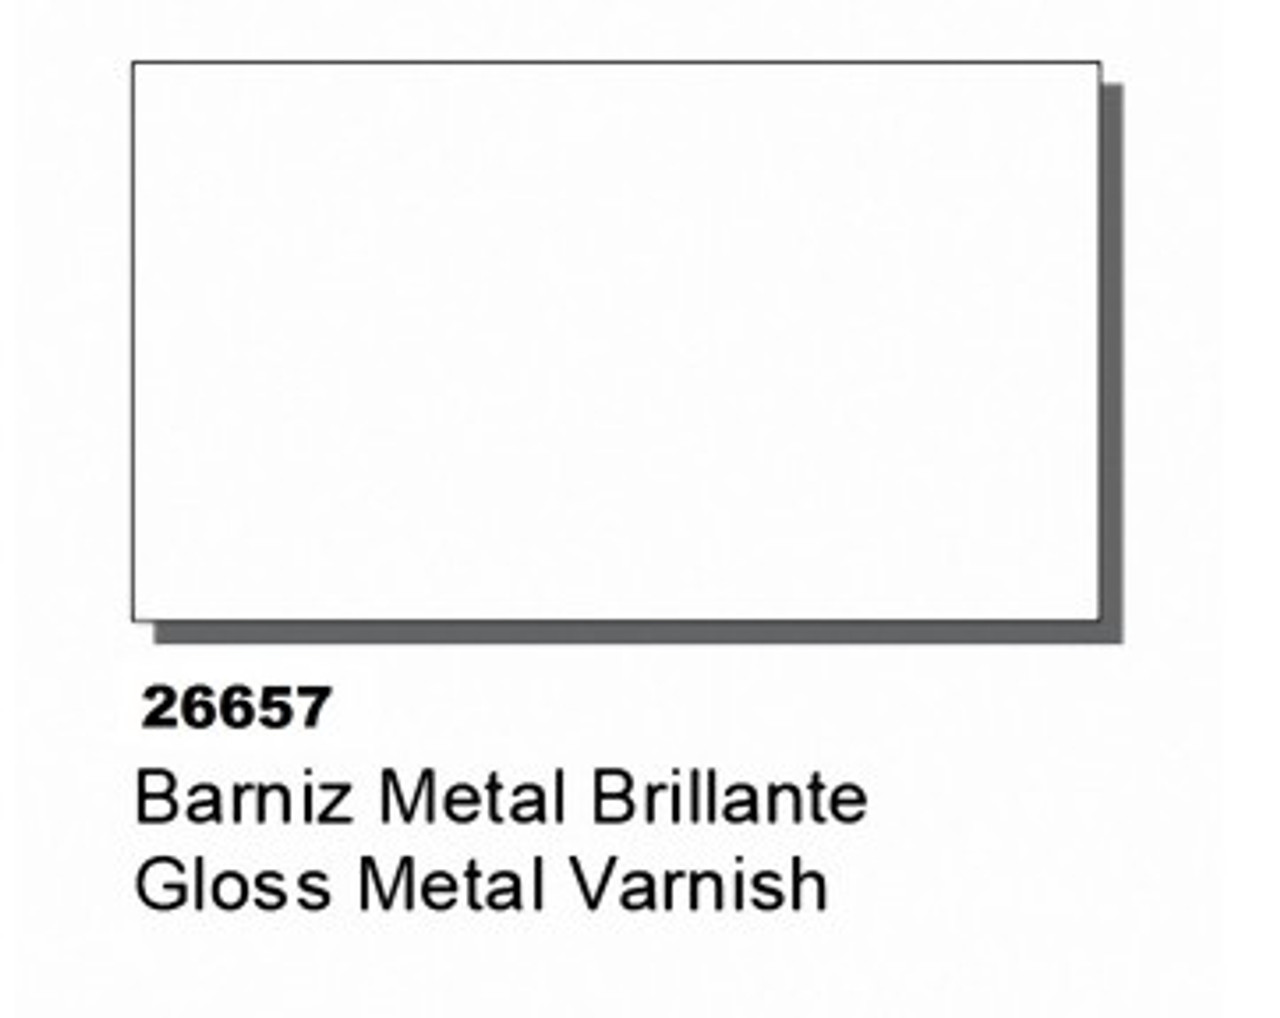  Vallejo Gloss Black Primer 32ml Paint : Arts, Crafts & Sewing